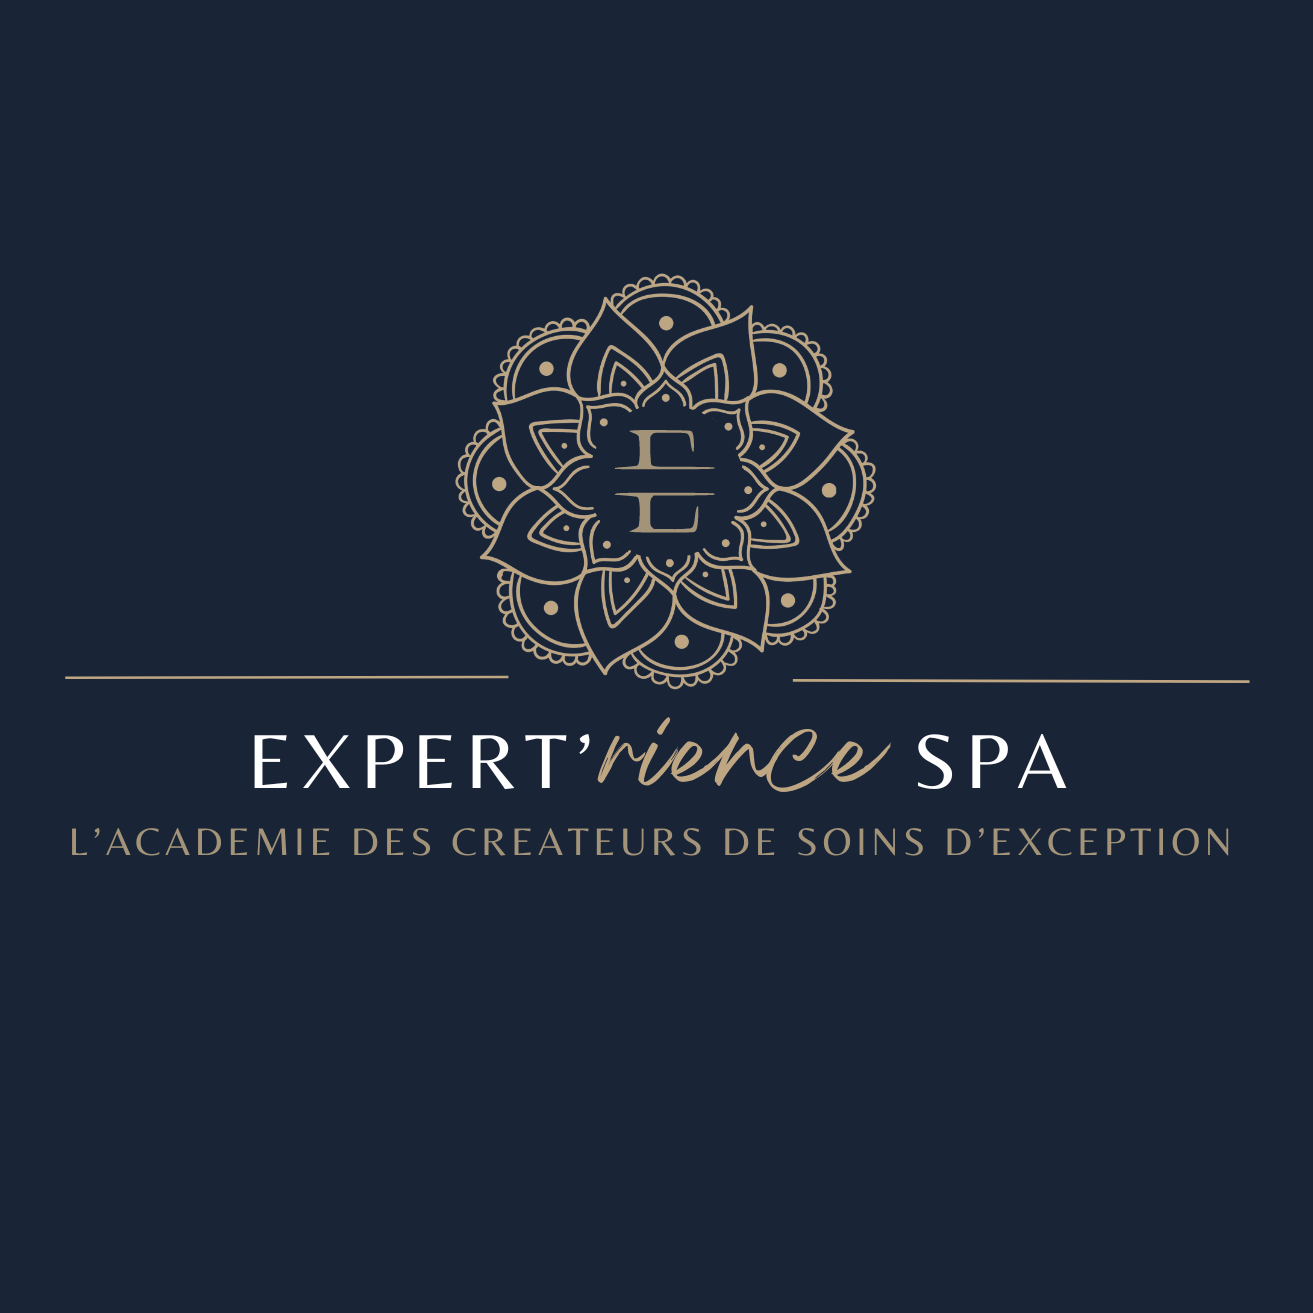 Expert'rience Spa